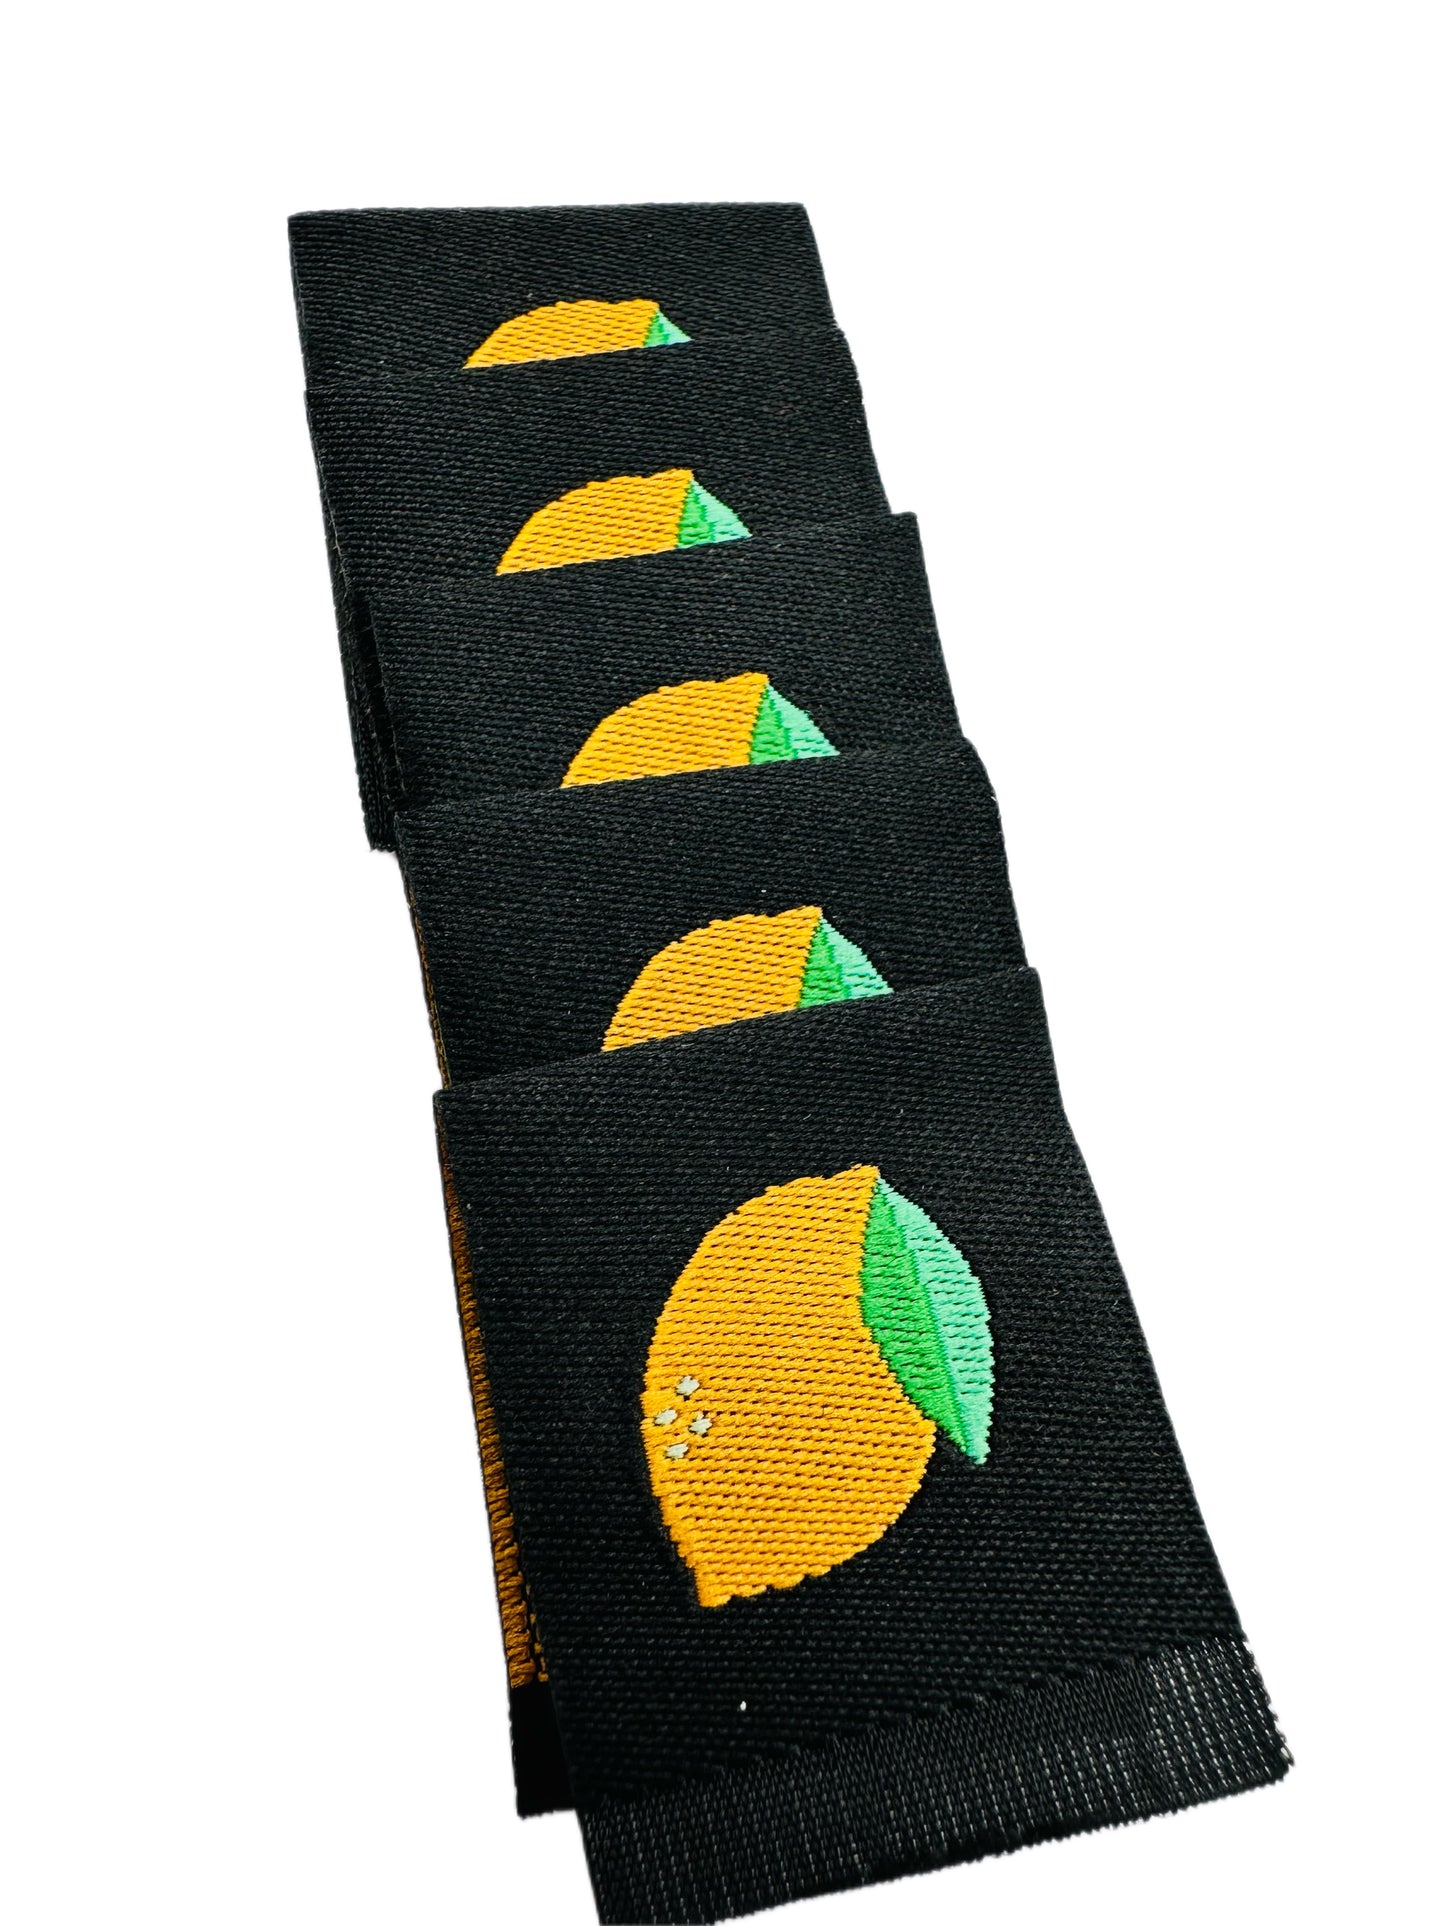 Fruit Themed Premium Woven Tags